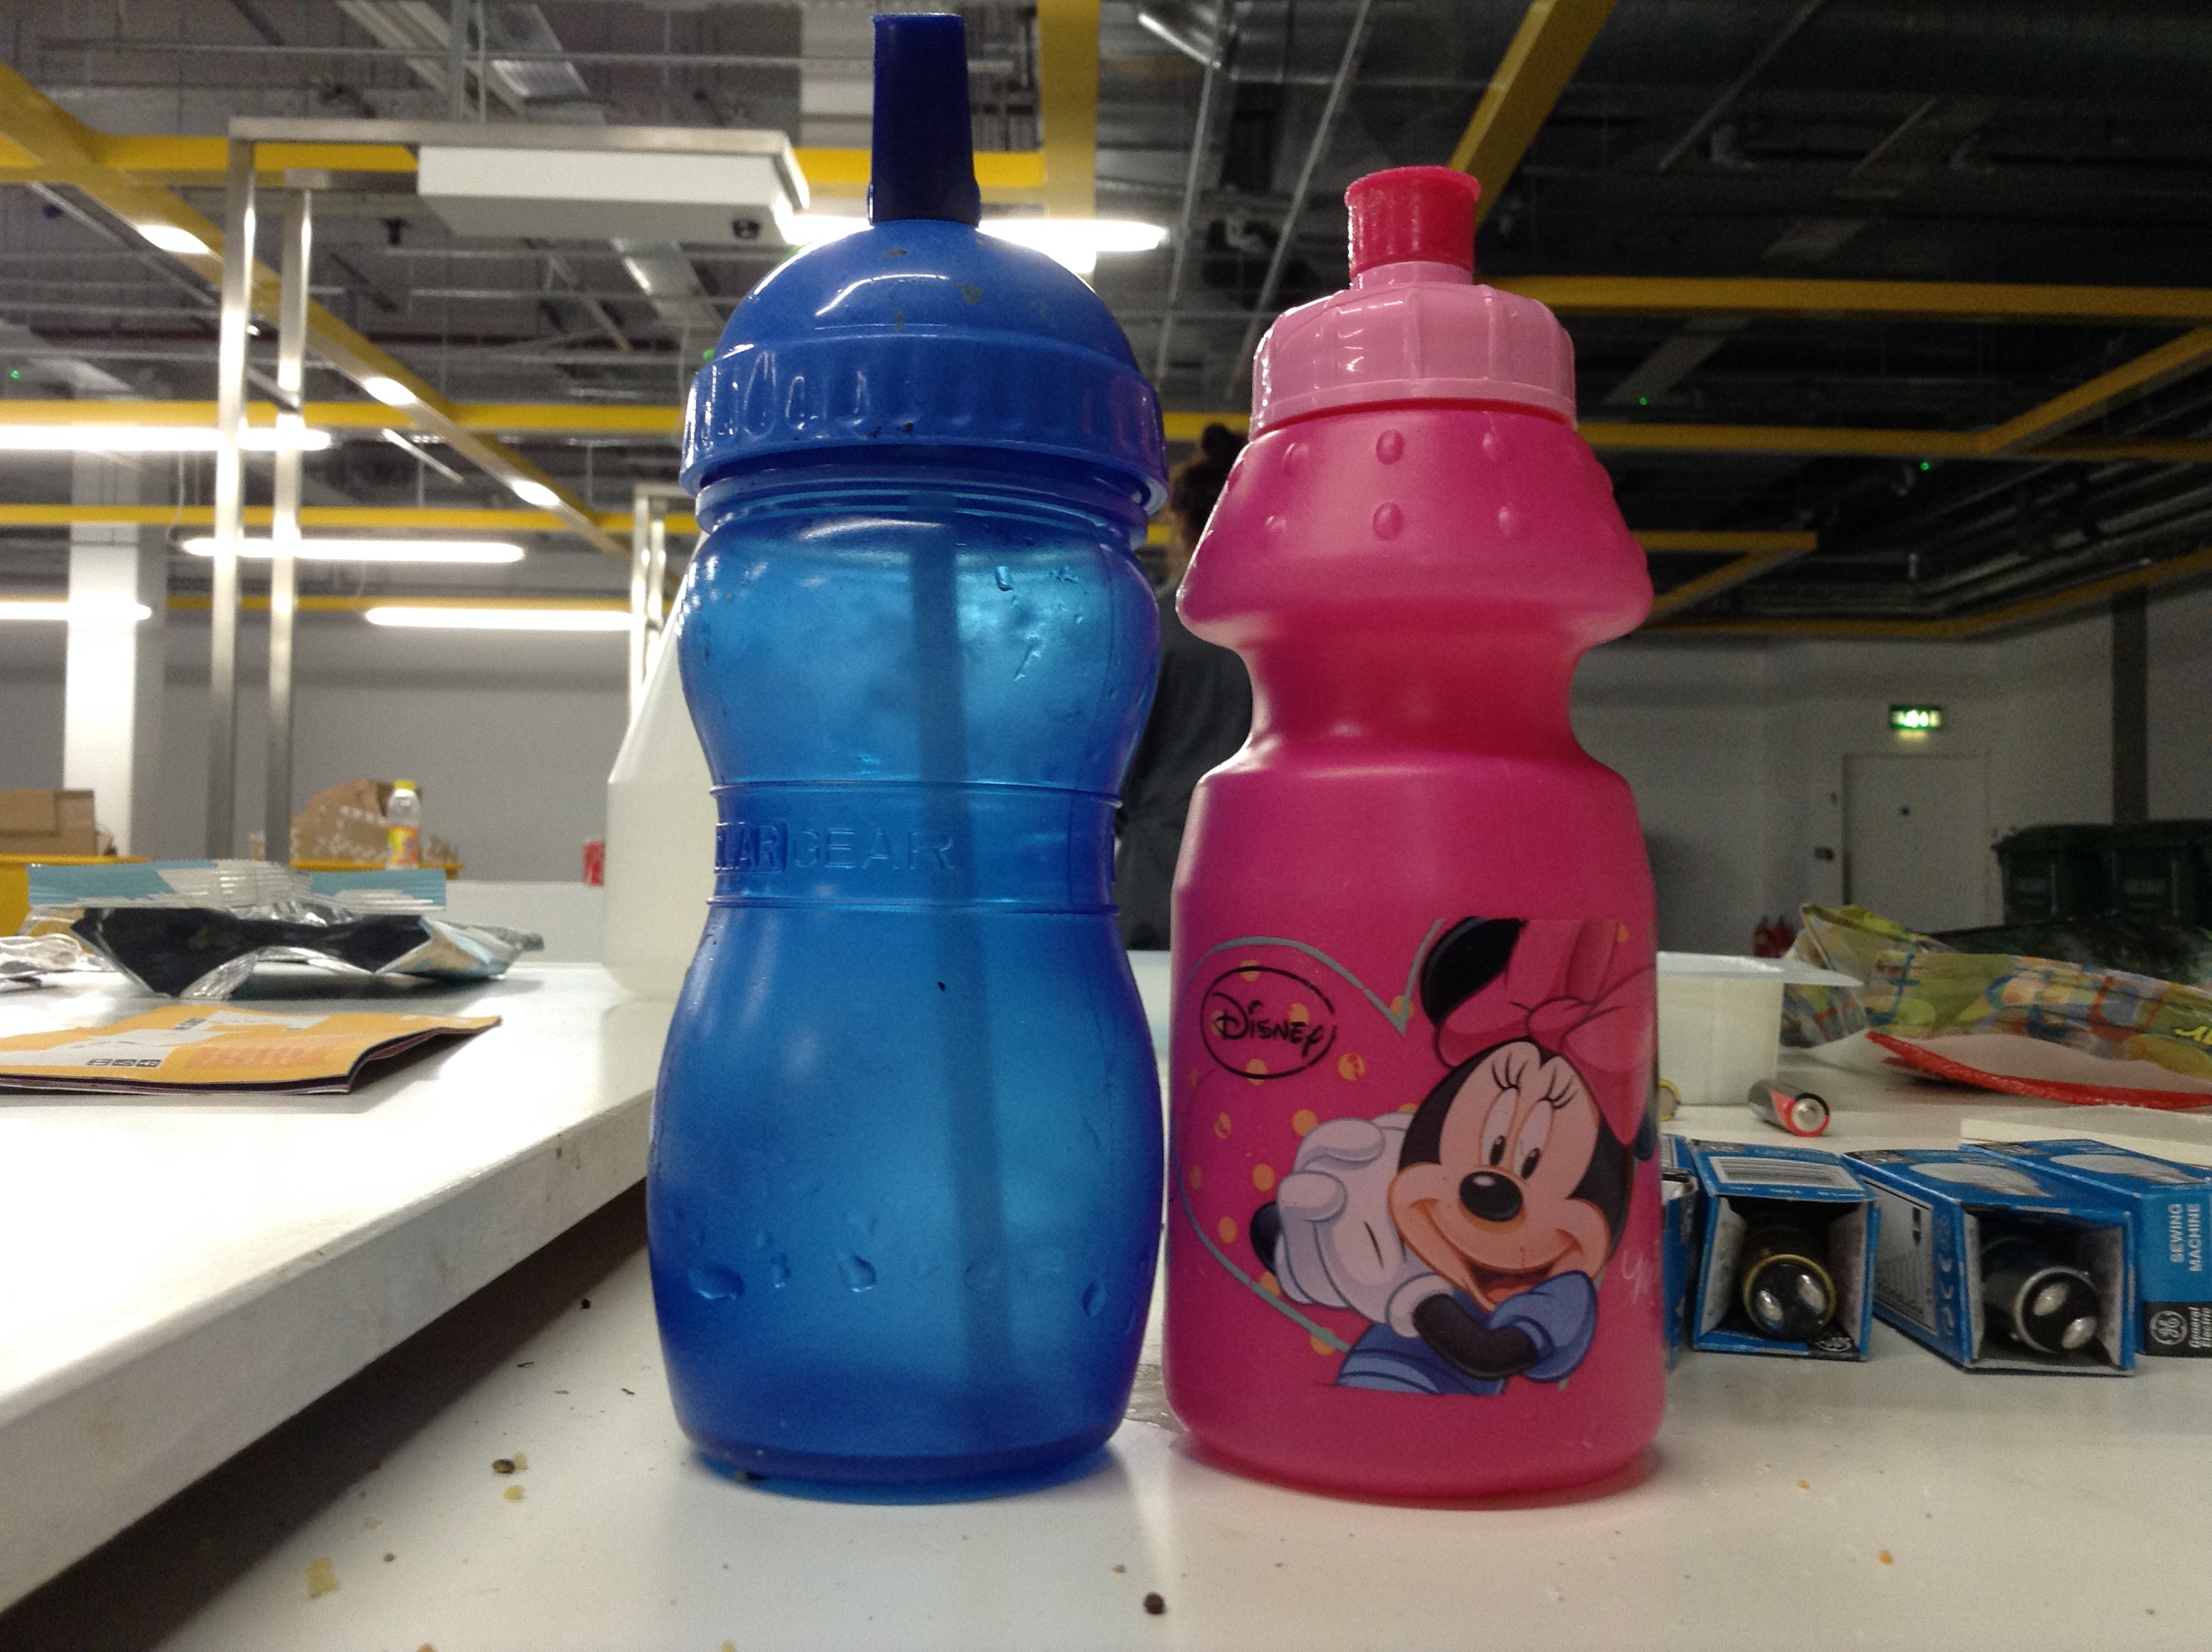 Drinks containers in The Rubbish Collection. Image credit: Corinne Burns